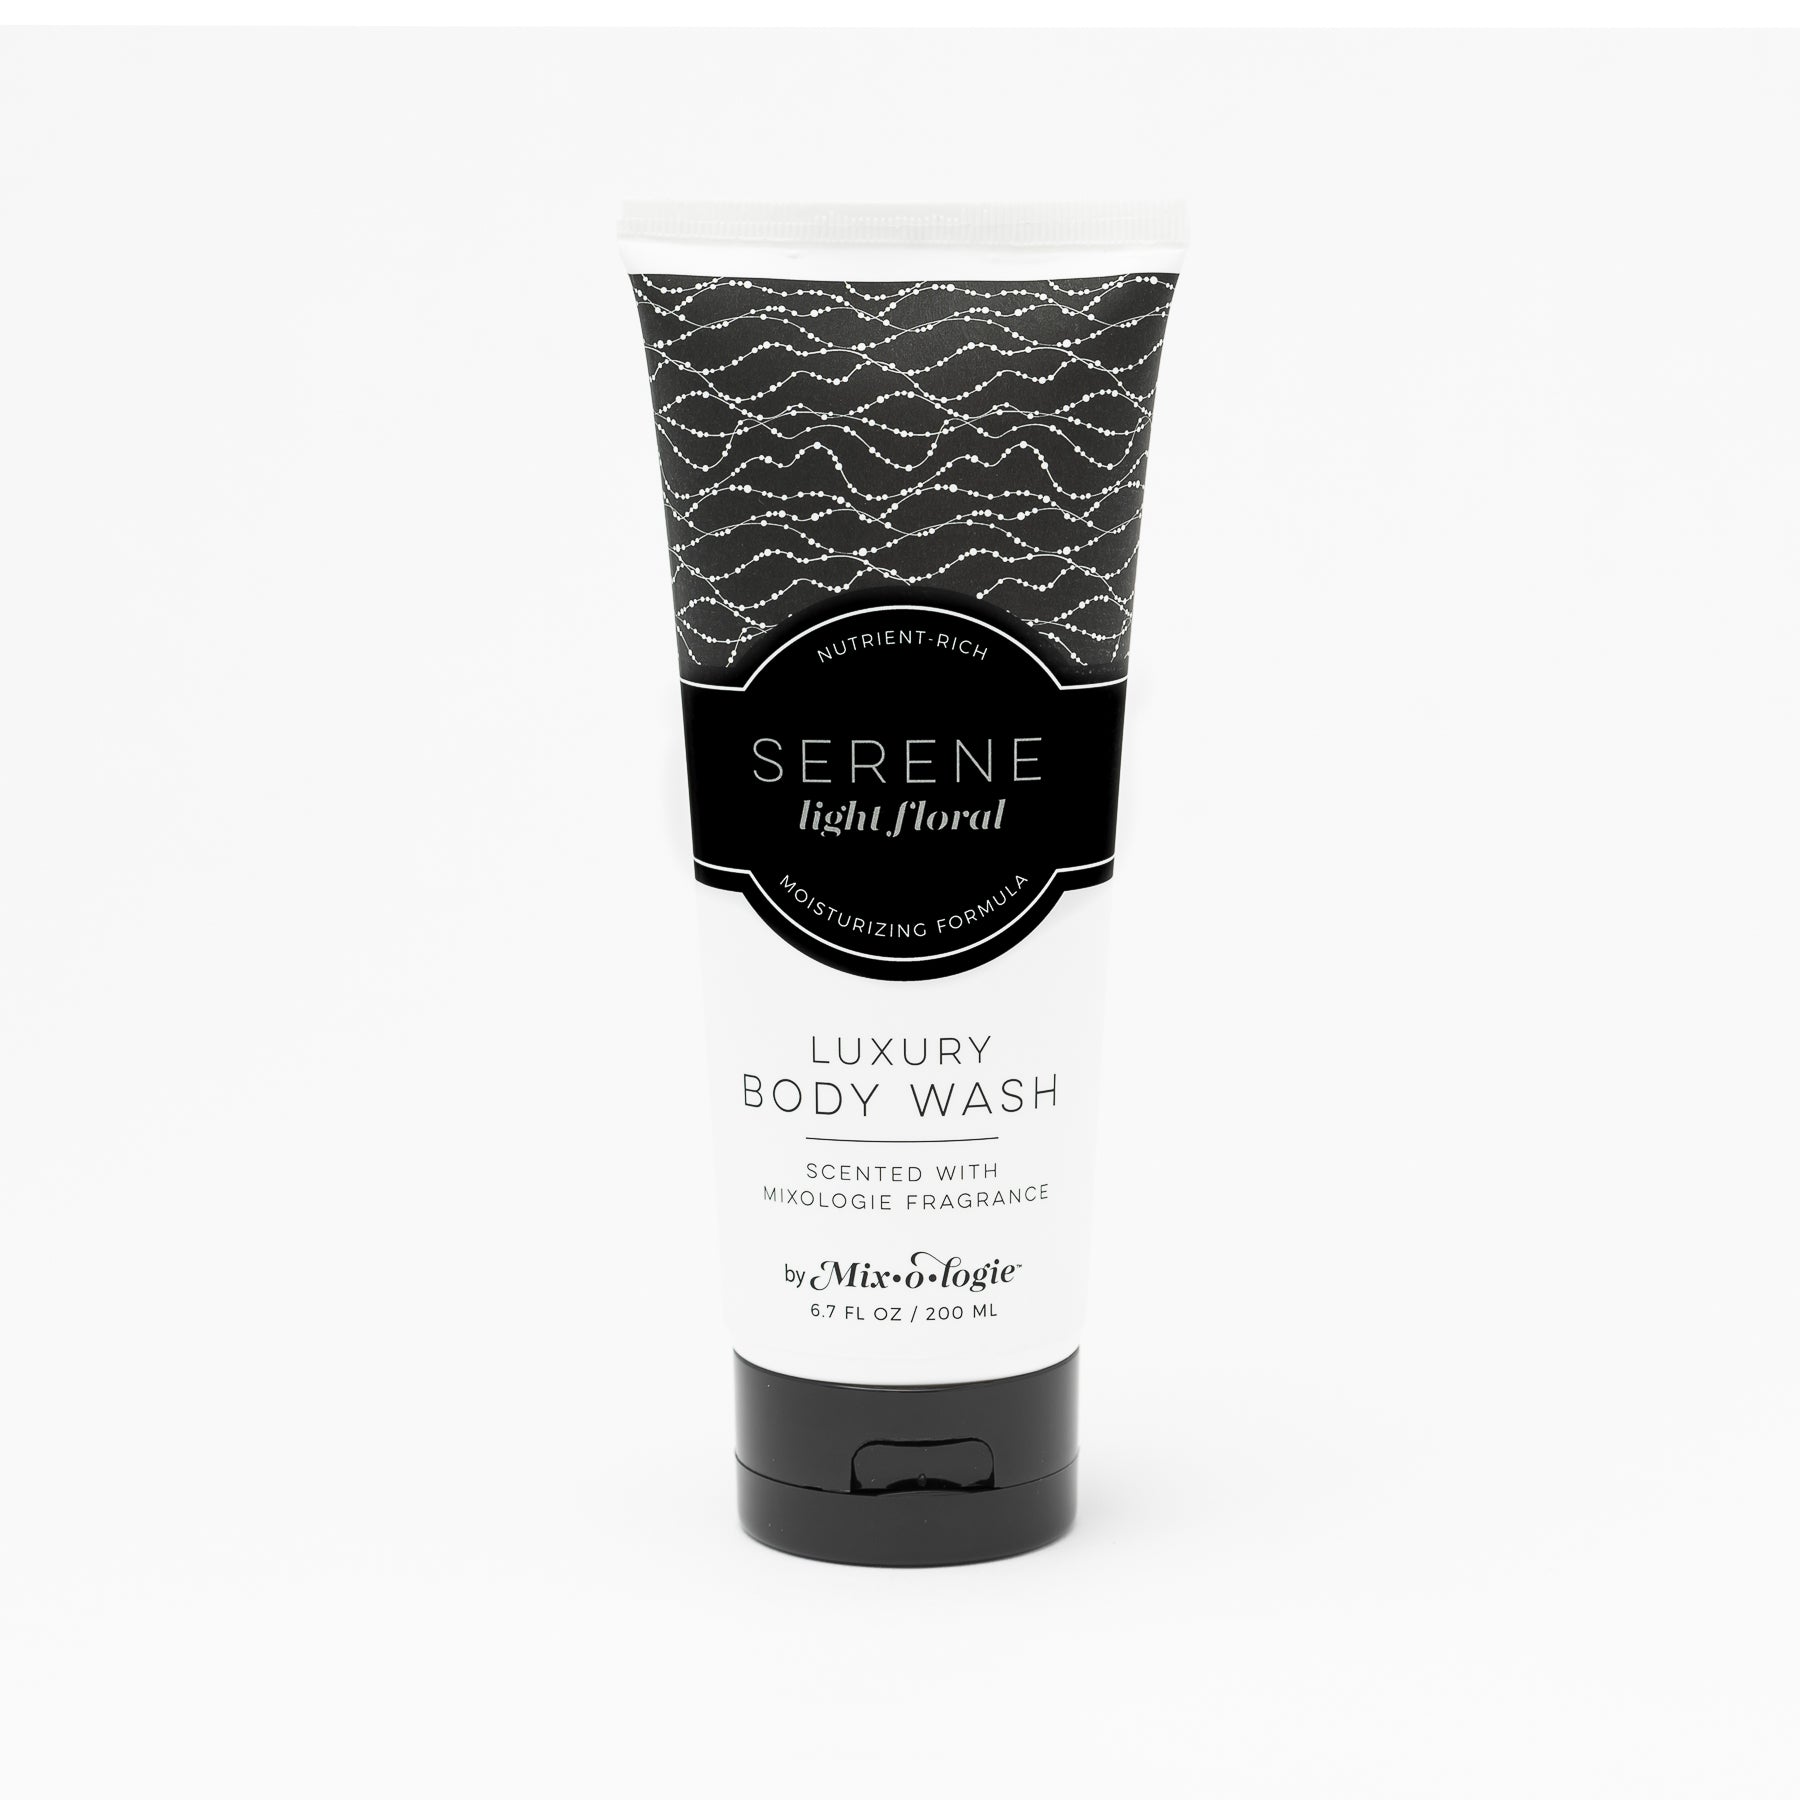 Luxury Body Wash in Serene (Light Floral) in white pattern package and black label in the sand with rocks and greenery .Contains 6.7 fl oz or 200 mL.